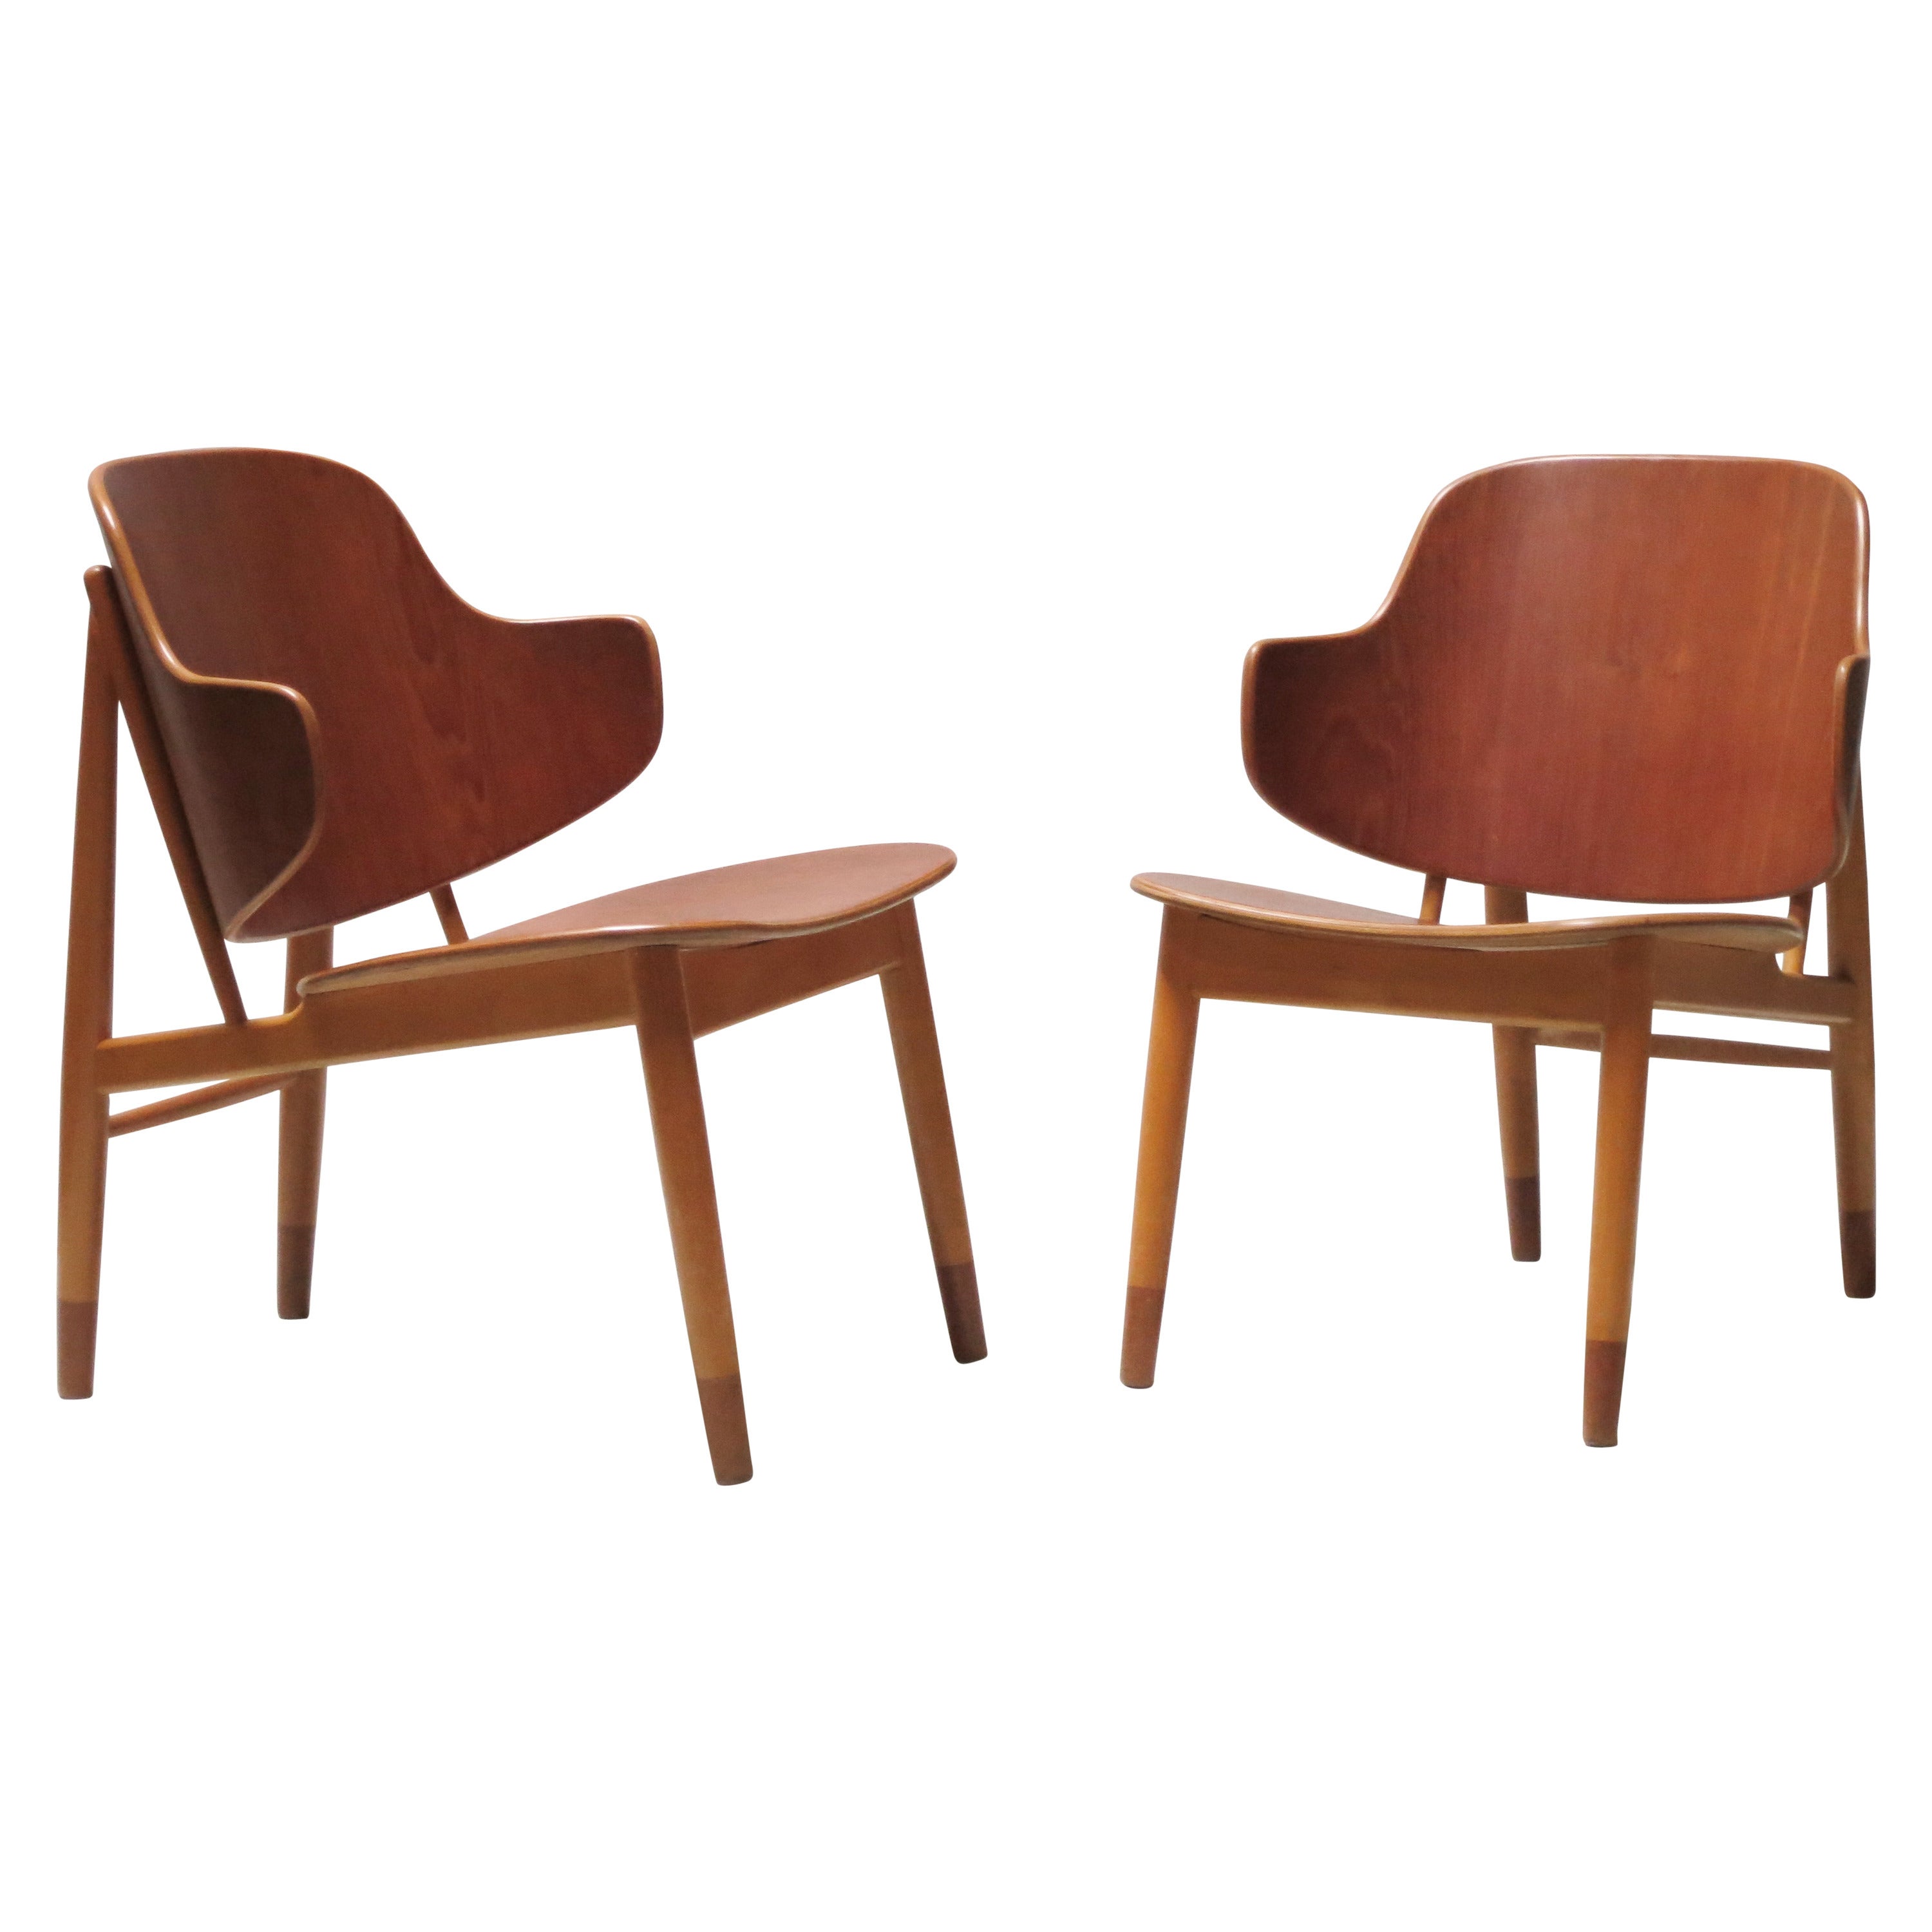 Pair of 1950s Lounge Chairs by Ib Kofod-Larsen For Sale